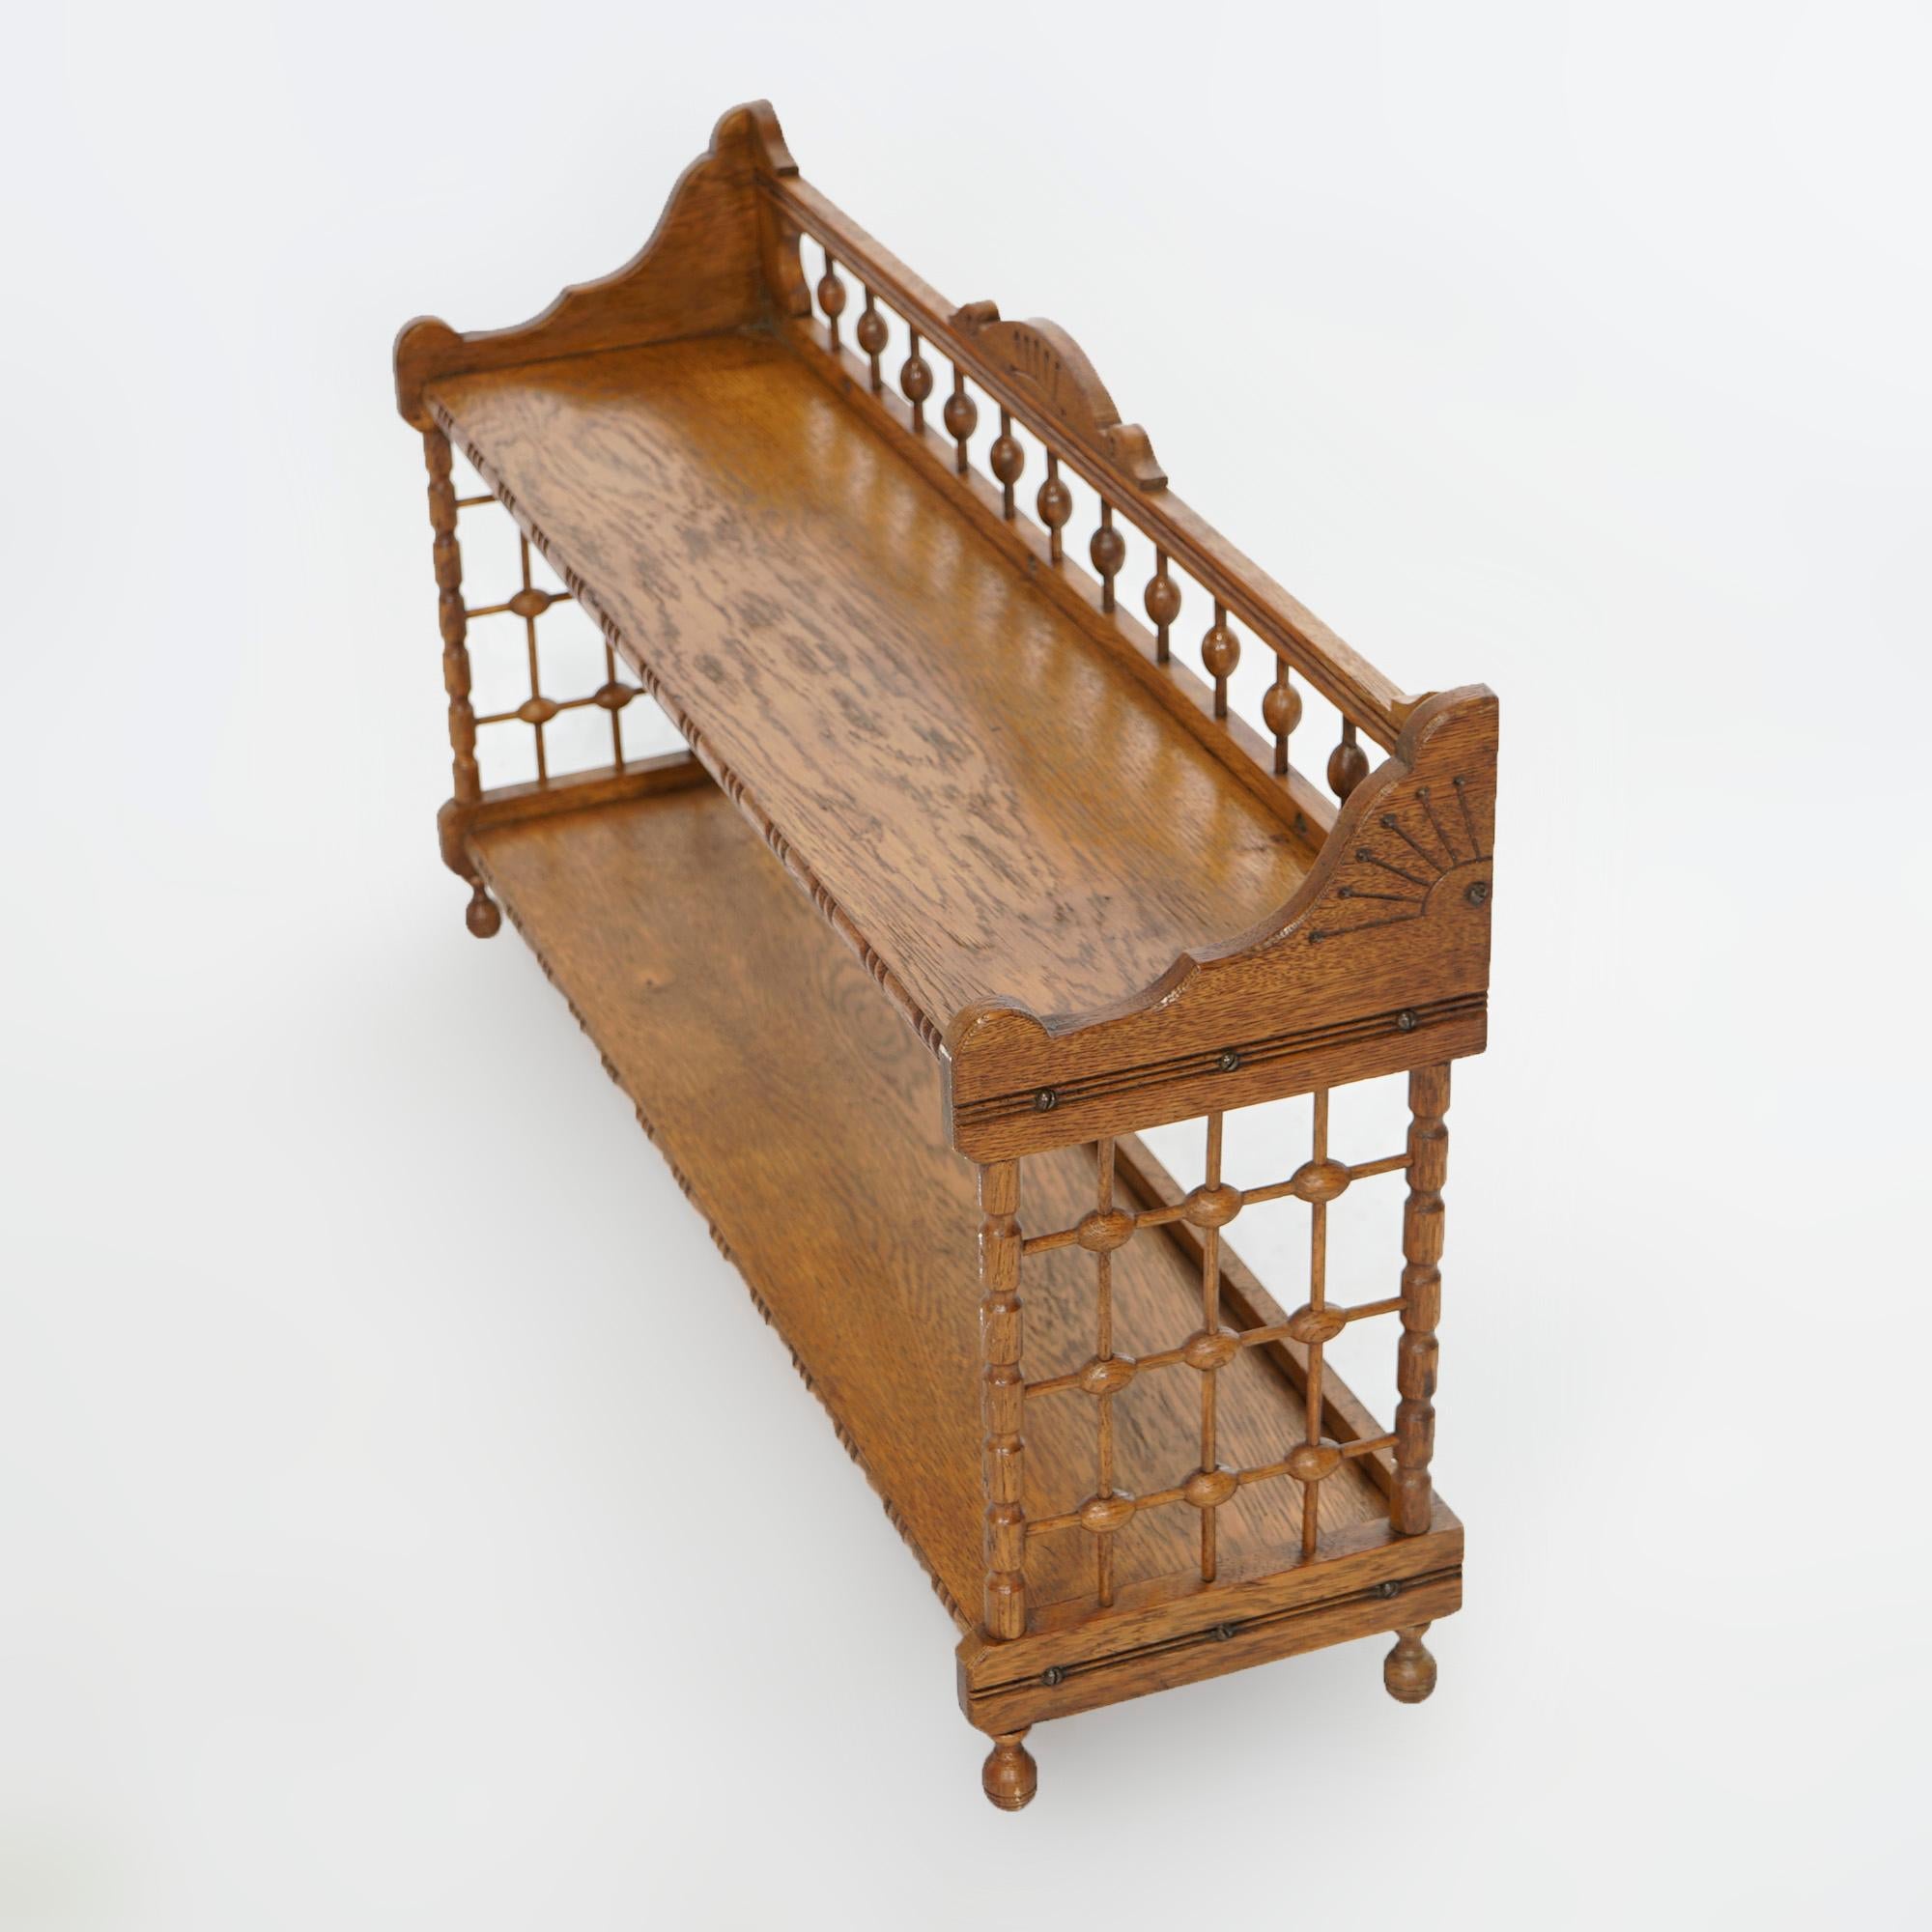 An antique Eastlake hanging wall shelf offers oak construction with stick and ball gallery and sides, crest with incised sunburst decoration and two shelves, c1900

Measures- 19.5'' H x 35.75'' W x 10'' D.

Catalogue Note: Ask about DISCOUNTED